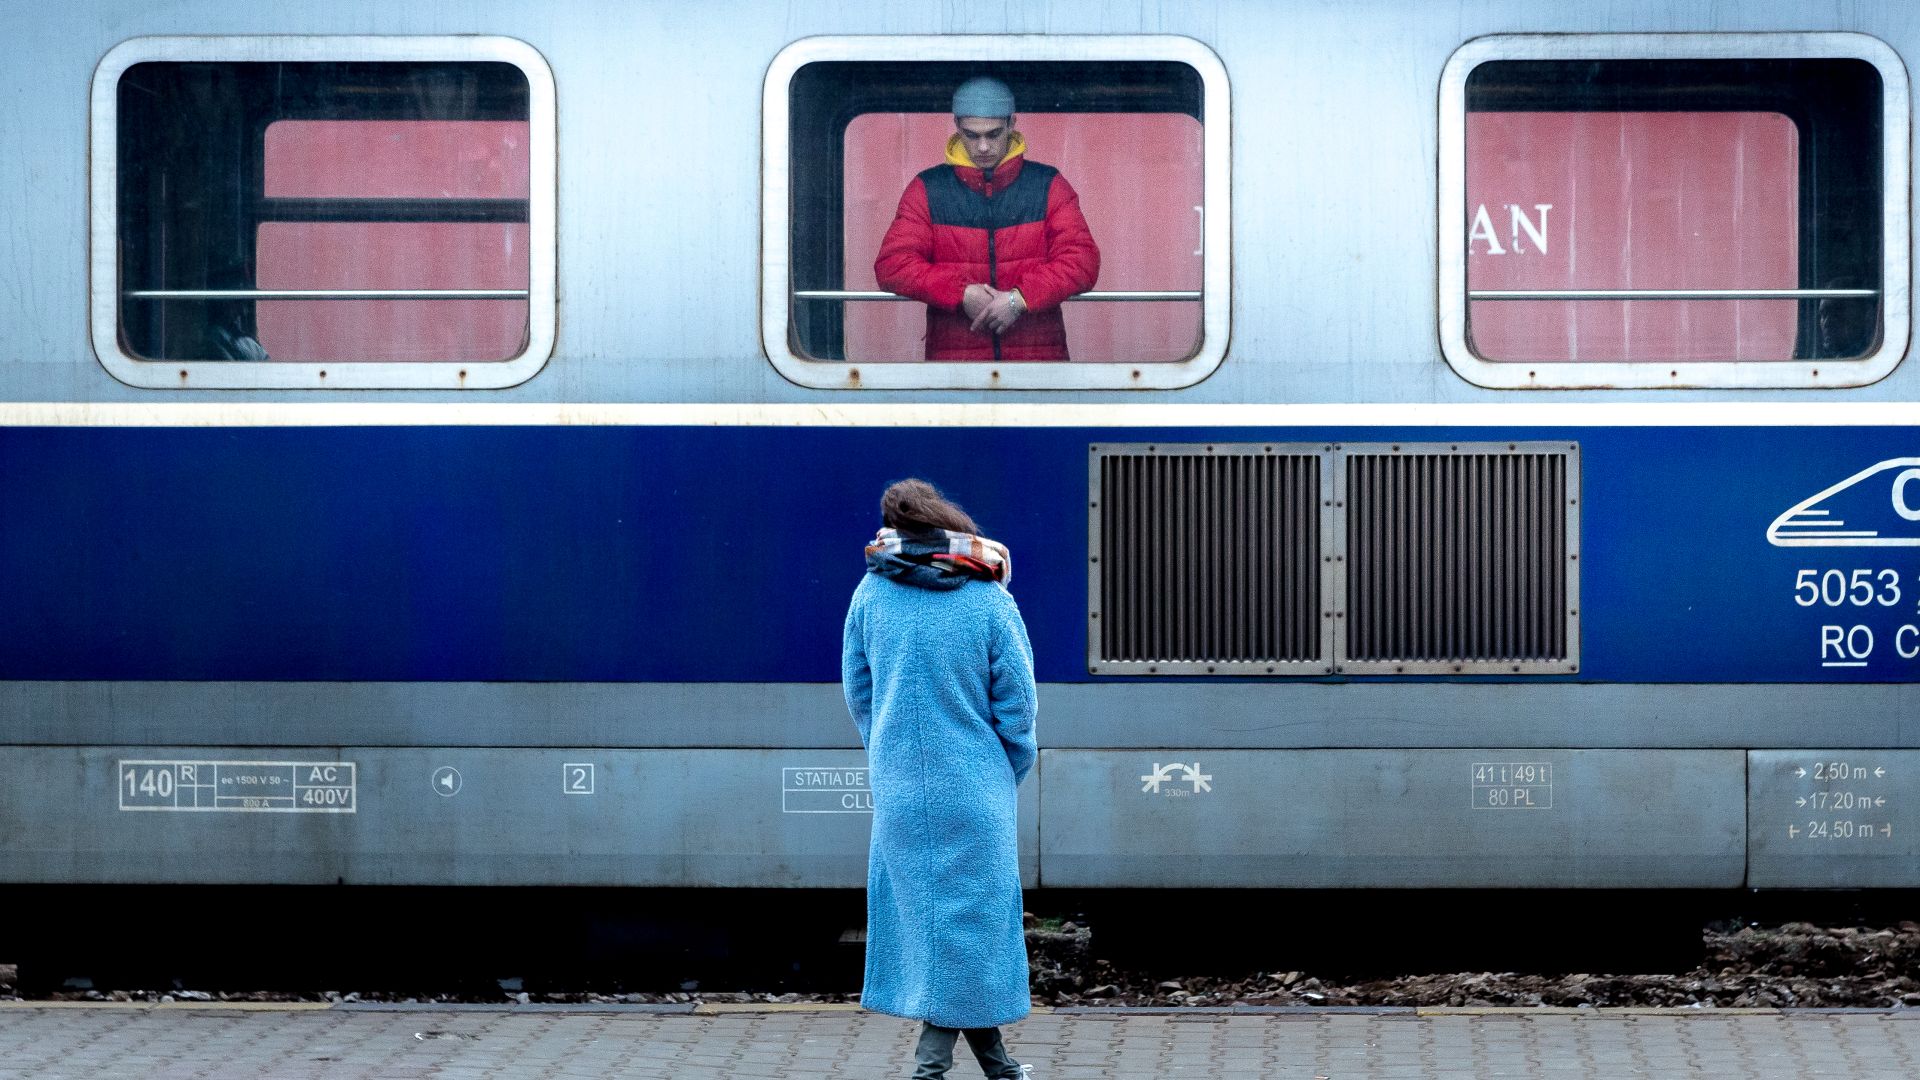 Two people say goodbye at a train station